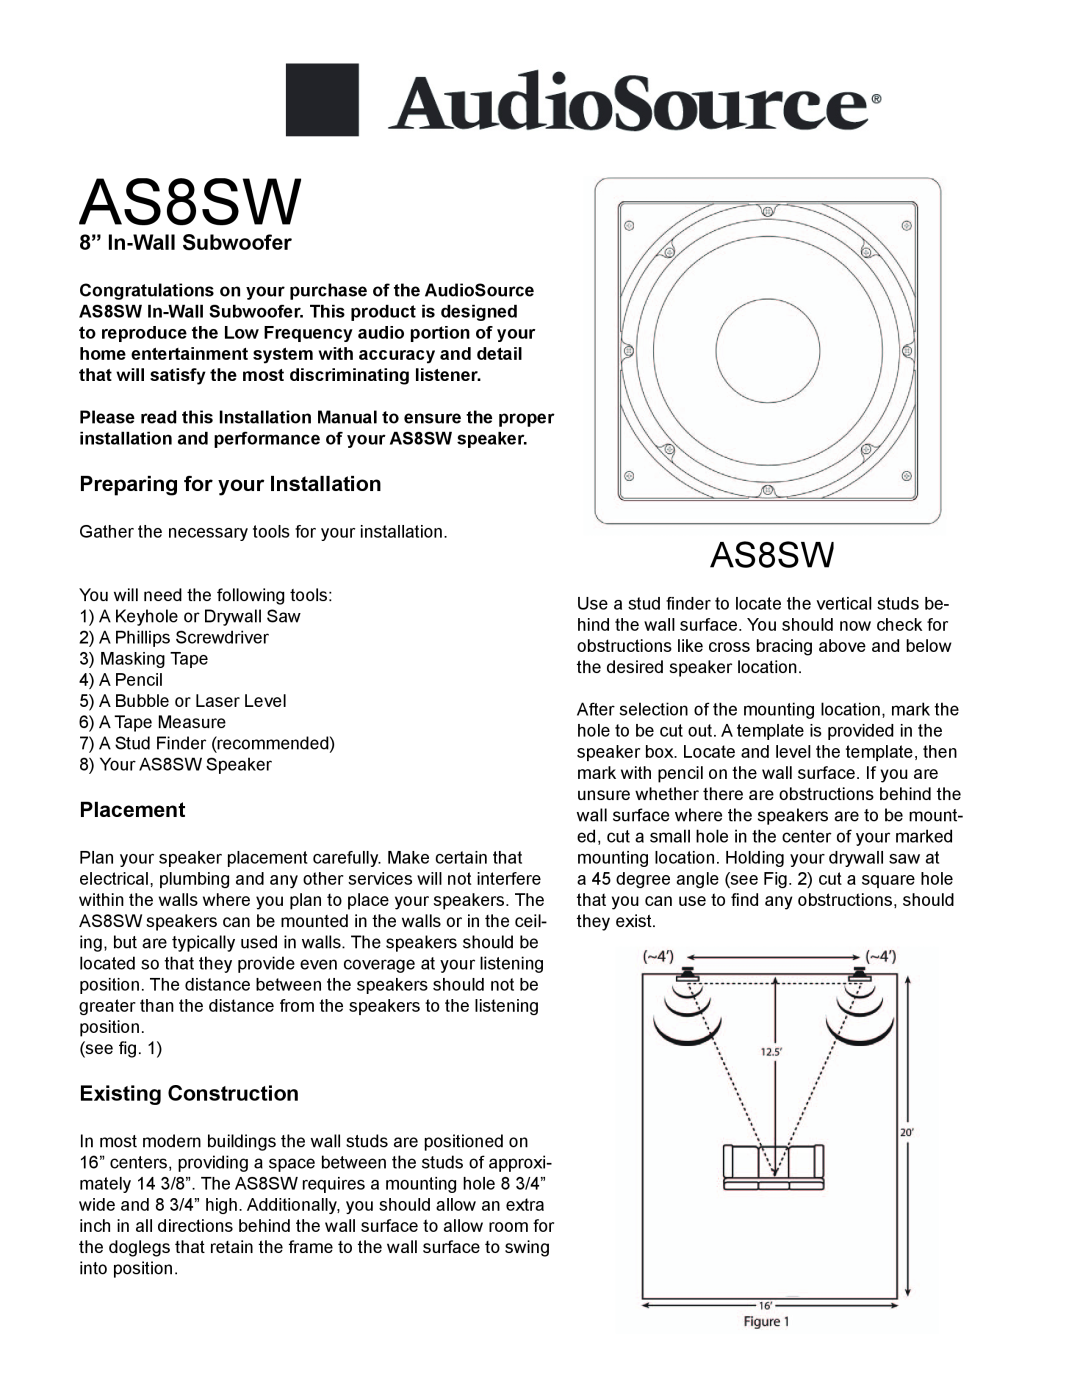 AudioSource AS8SW, In-Wall Subwoofer installation manual 8” In-WallSubwoofer, Preparing for your Installation, Placement 